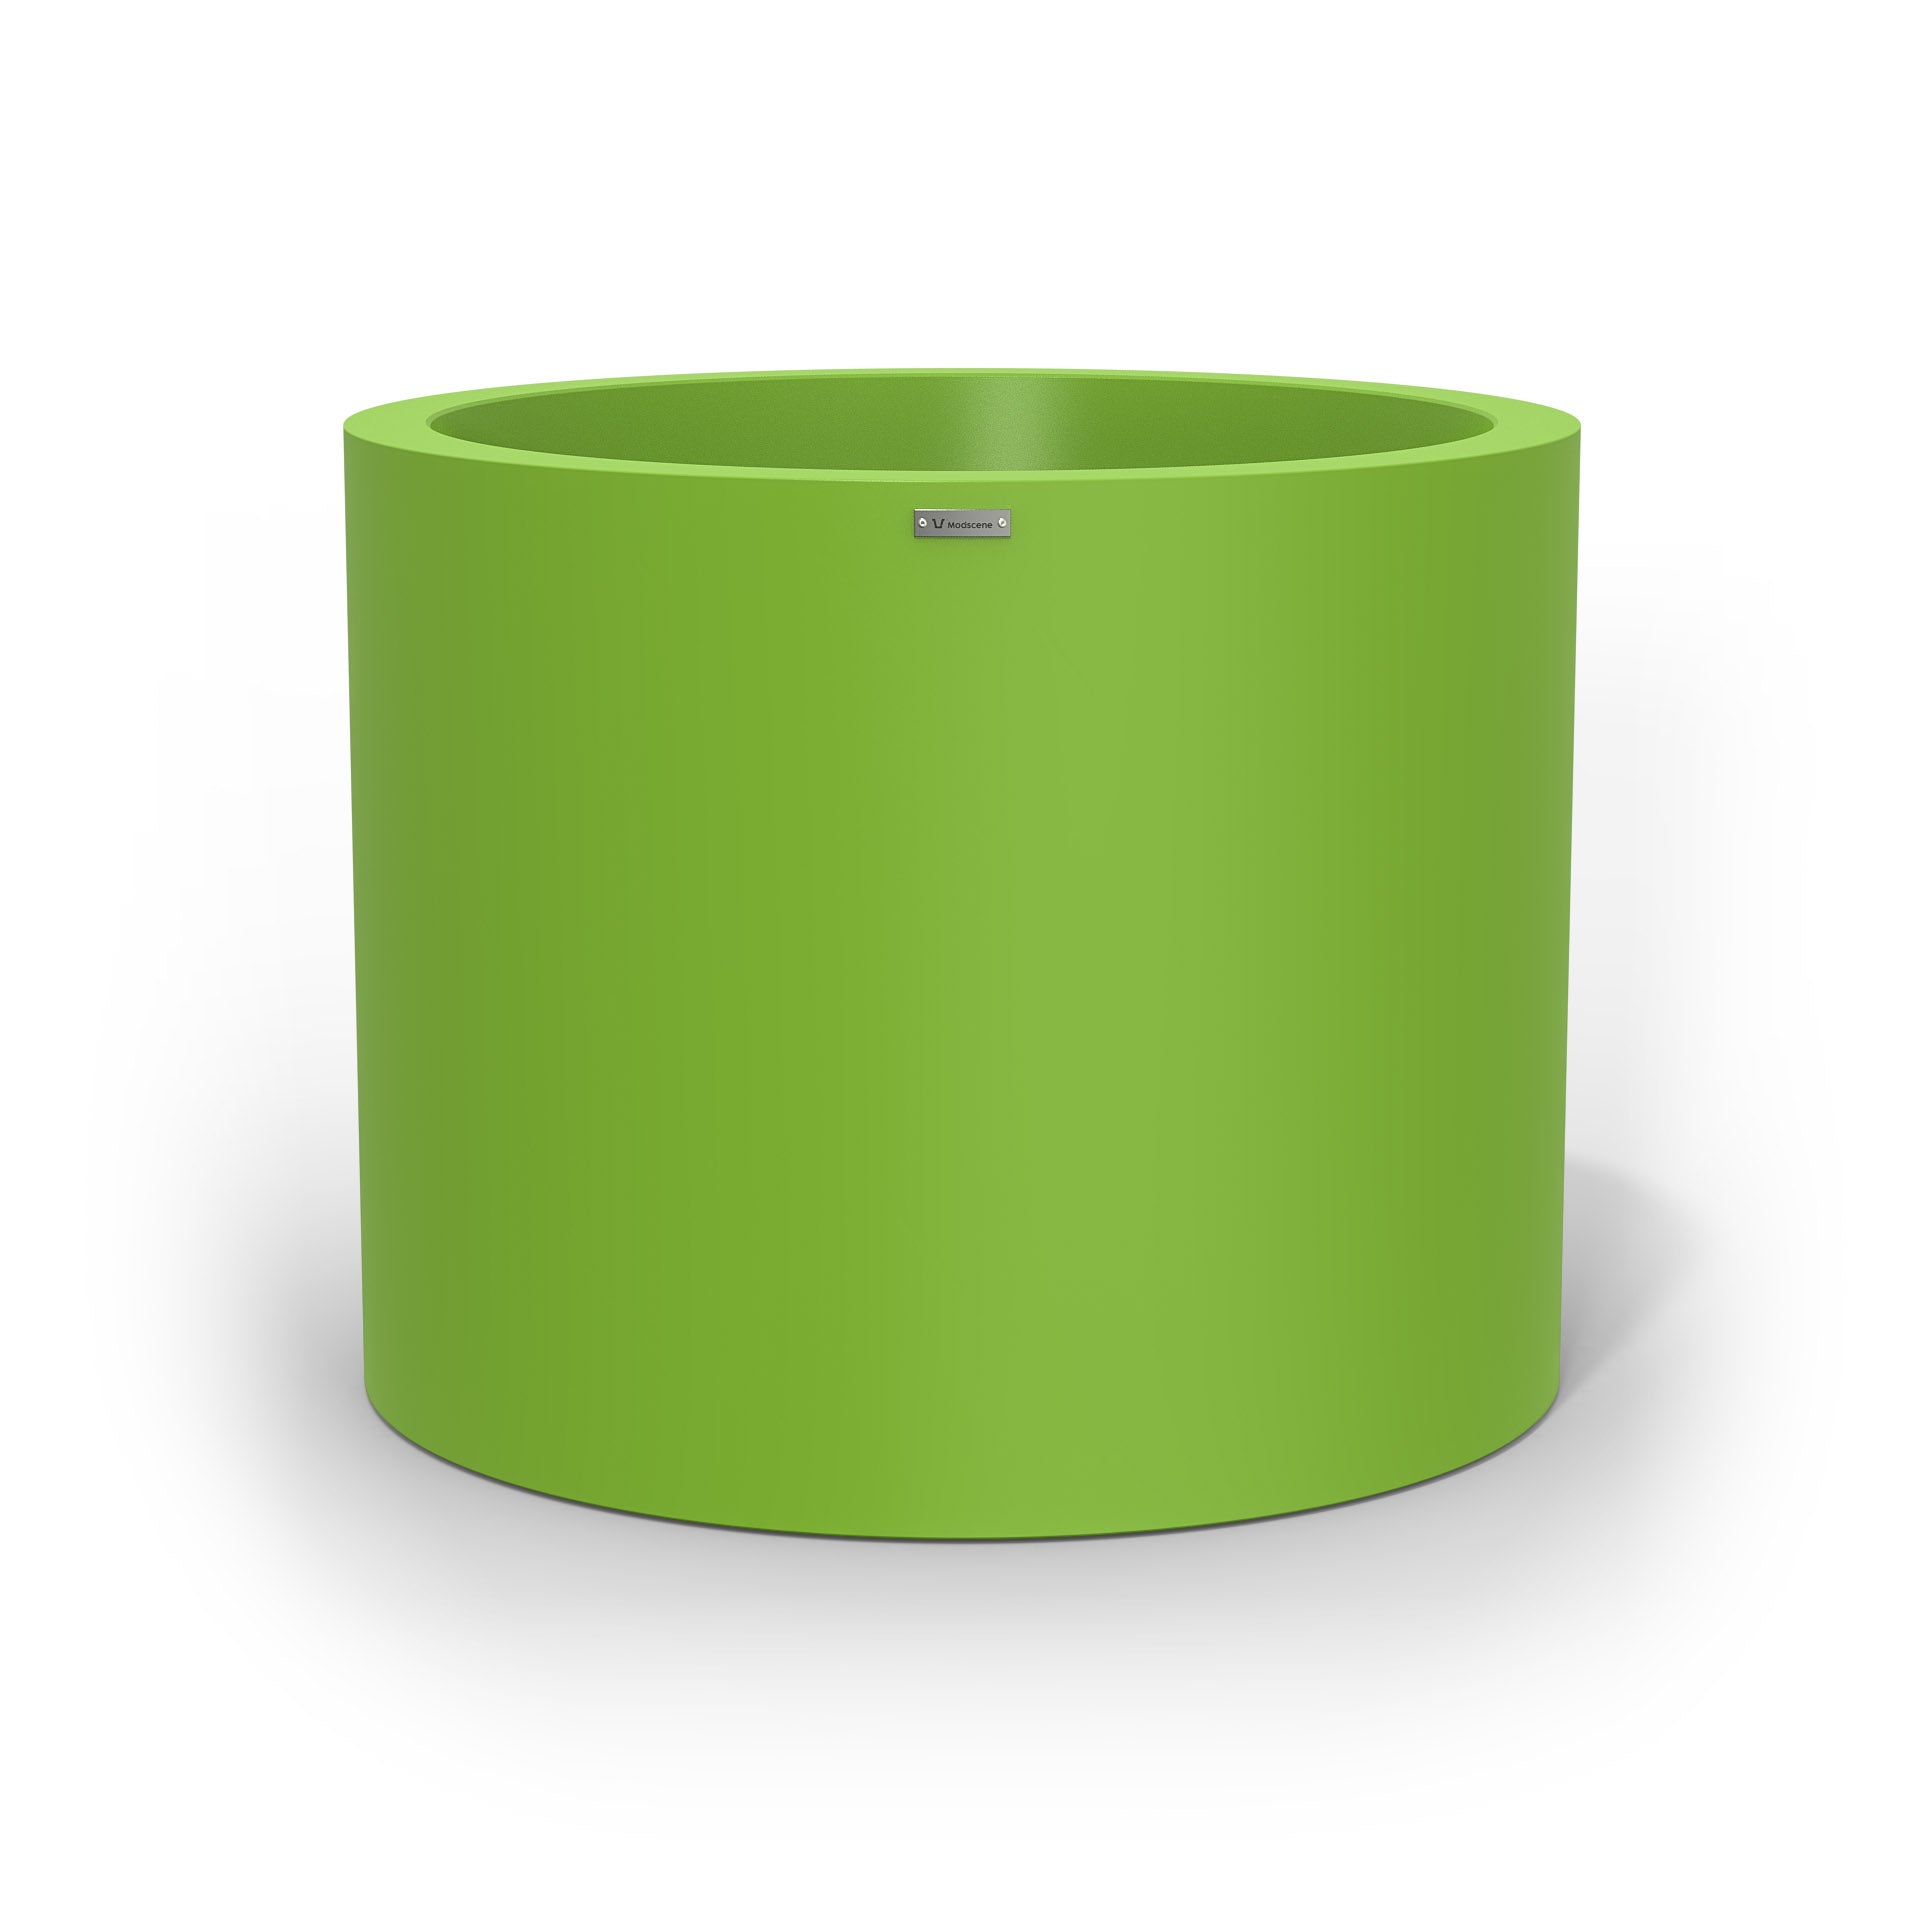 An extra large cylinder pot planter in green. Made by Modscene New Zealand.